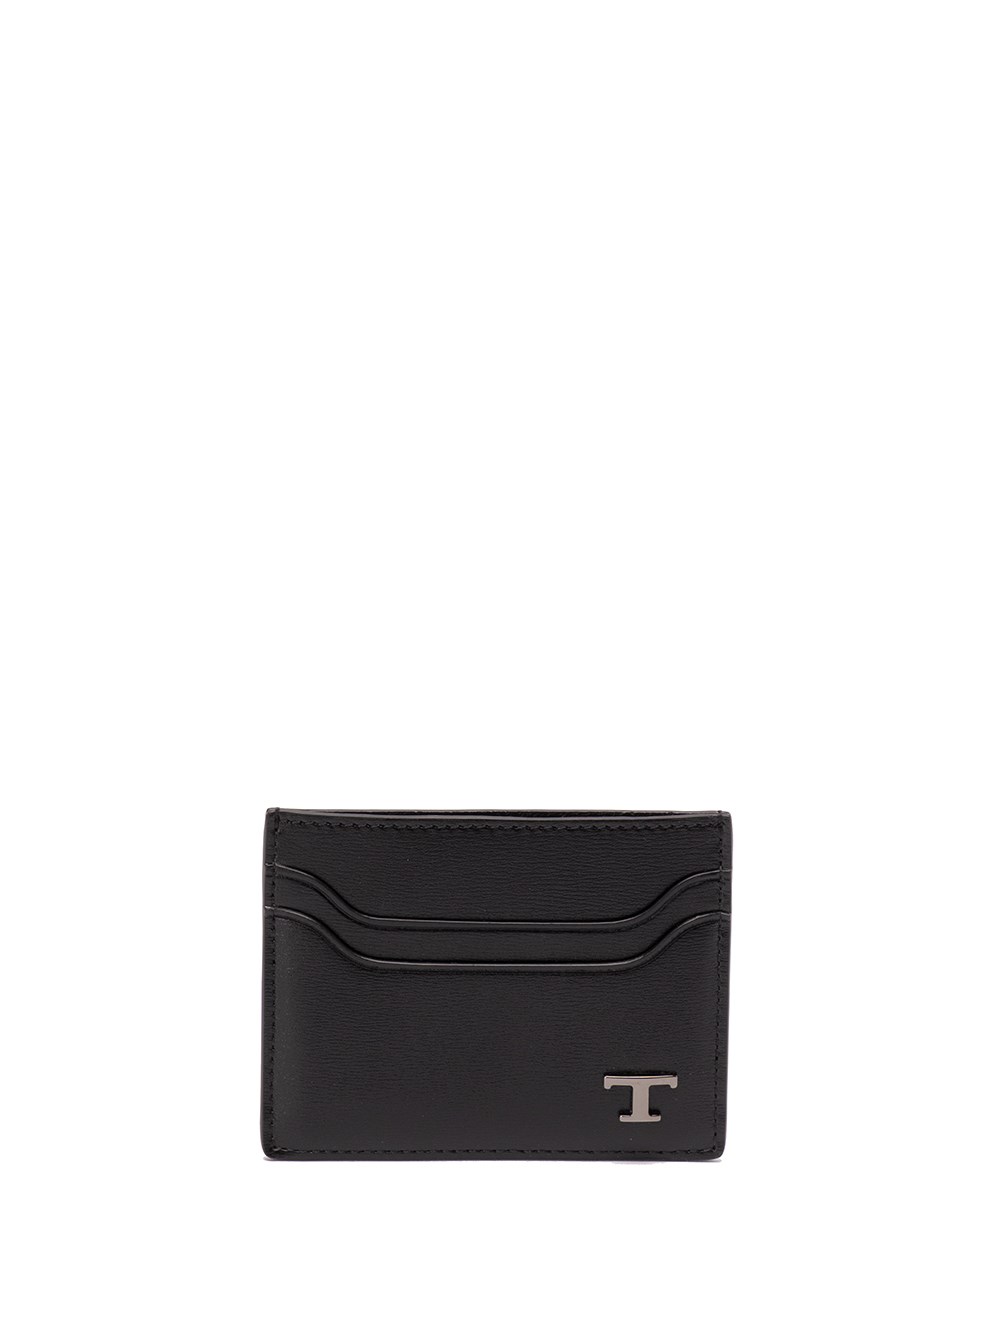 TOD'S LEATHER CARD HOLDER